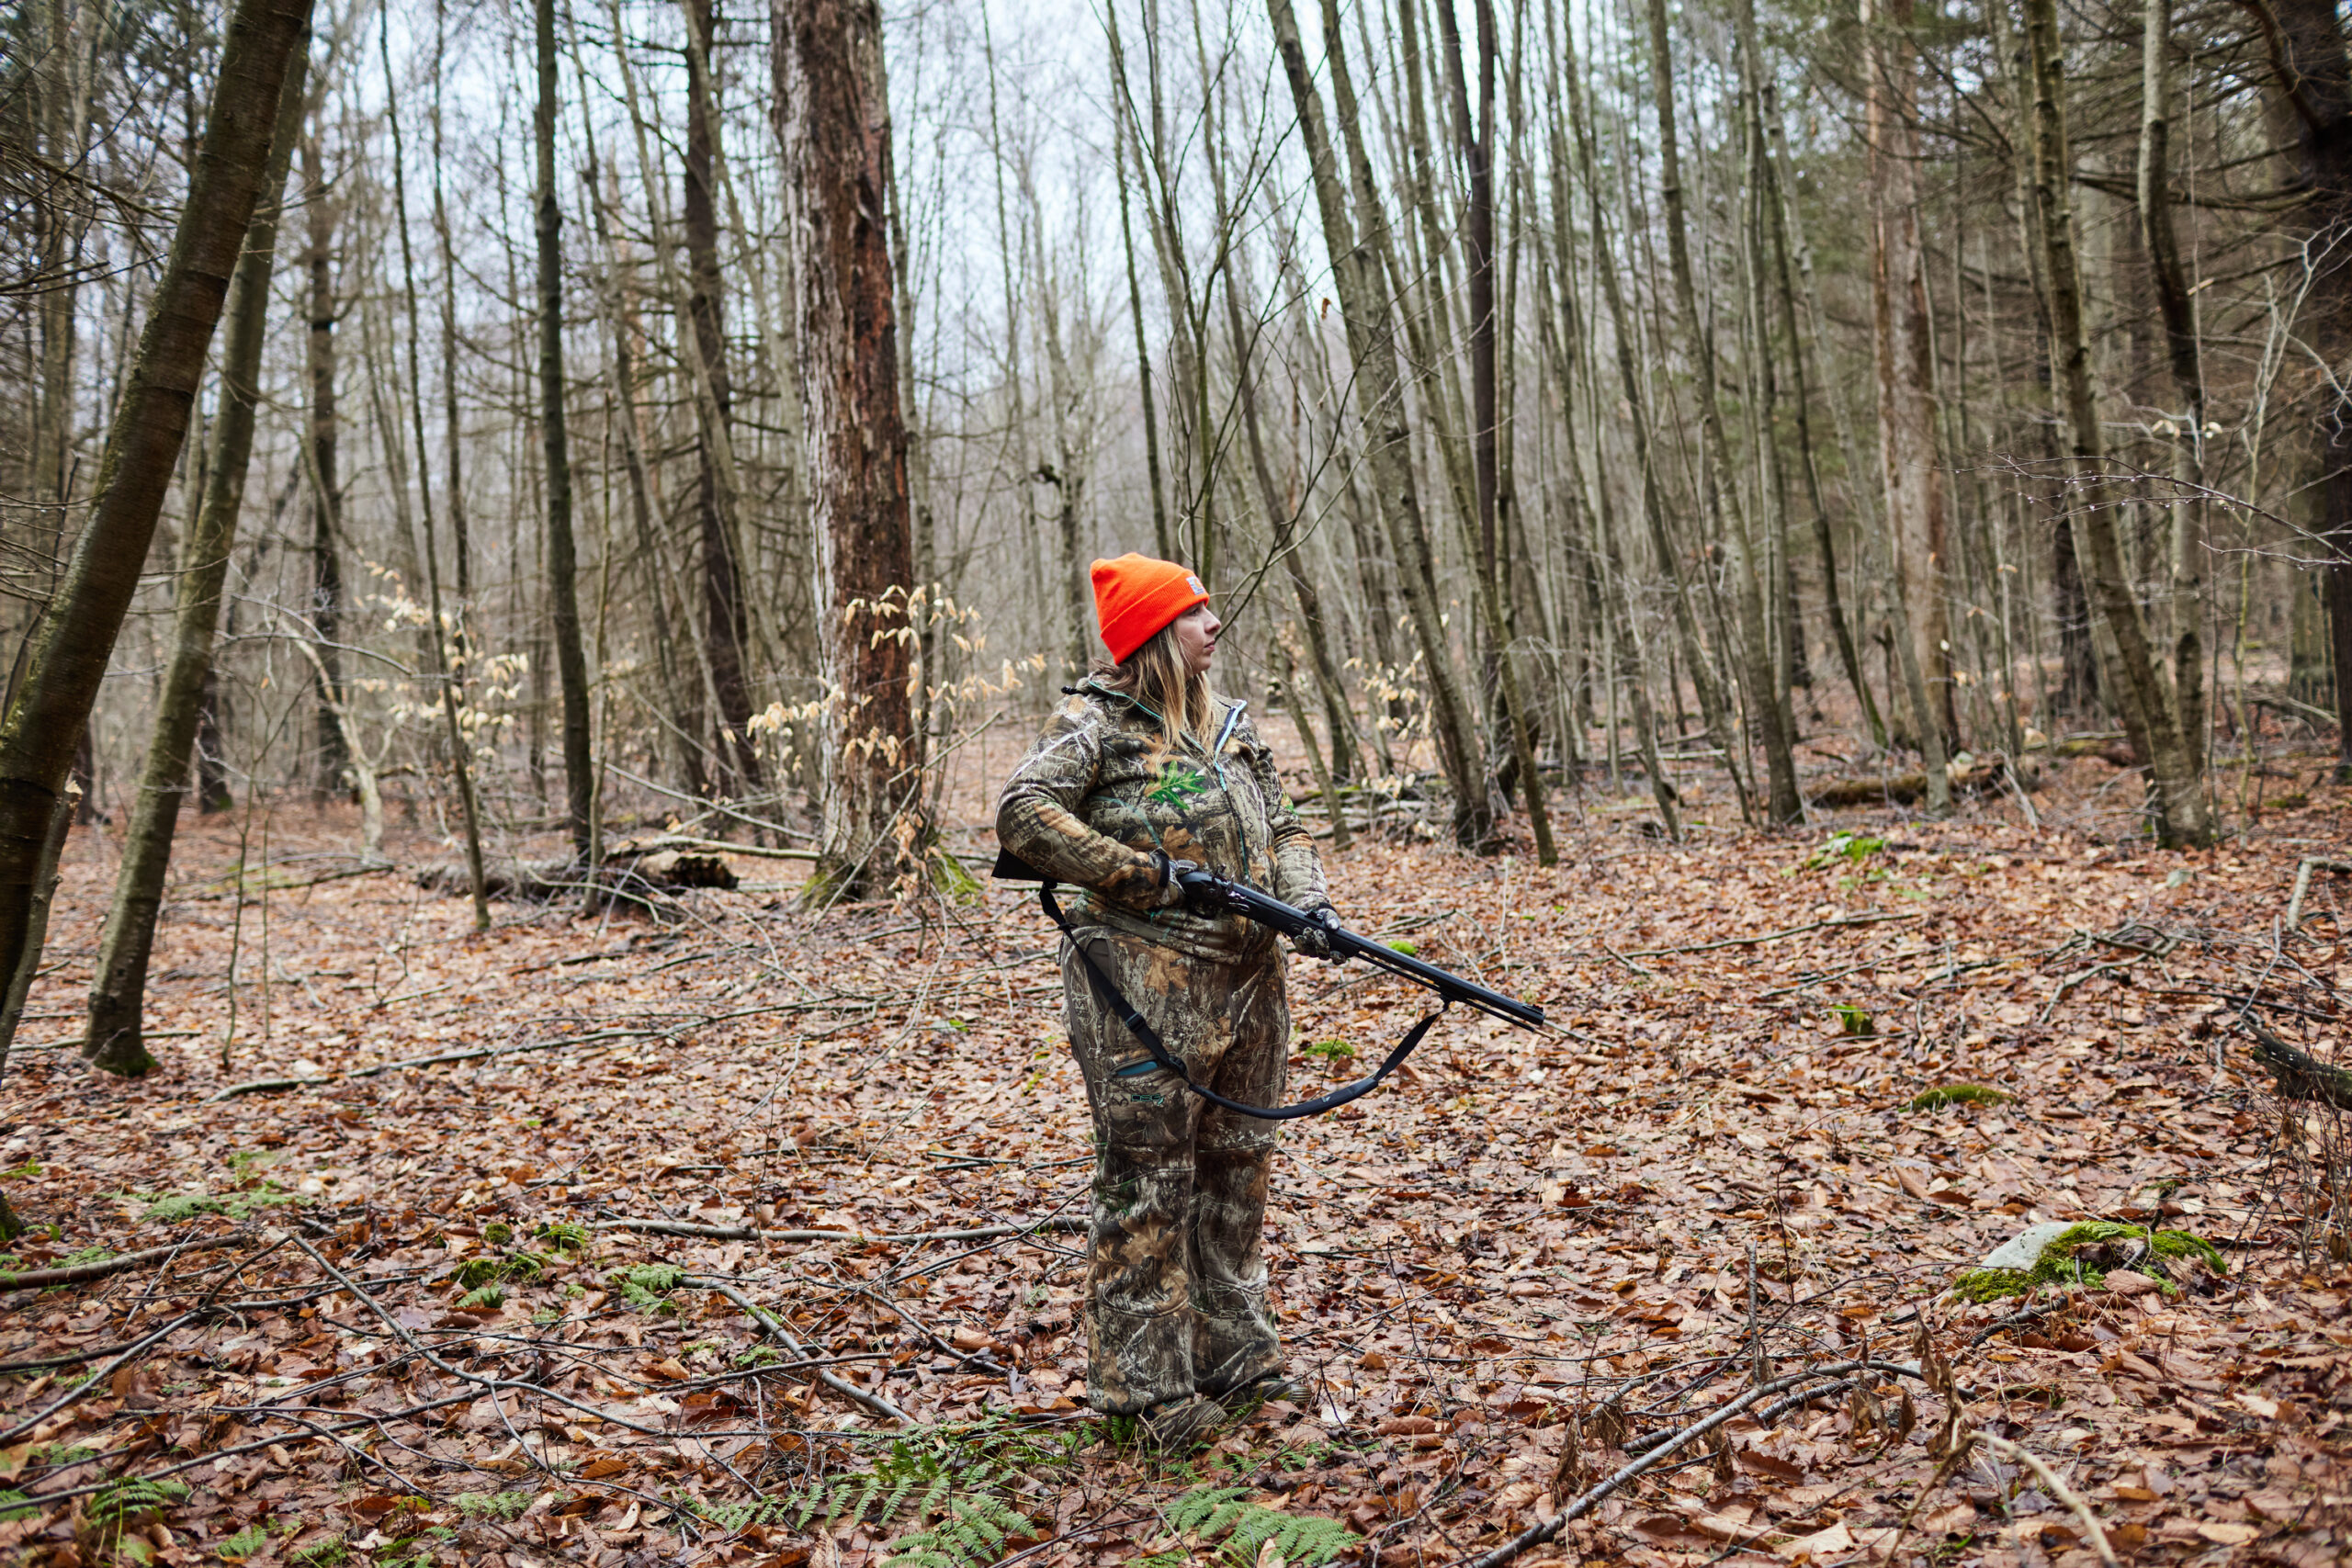 A hunter in her mid-20s stands with a flintlock rifle, gazing into the woods.